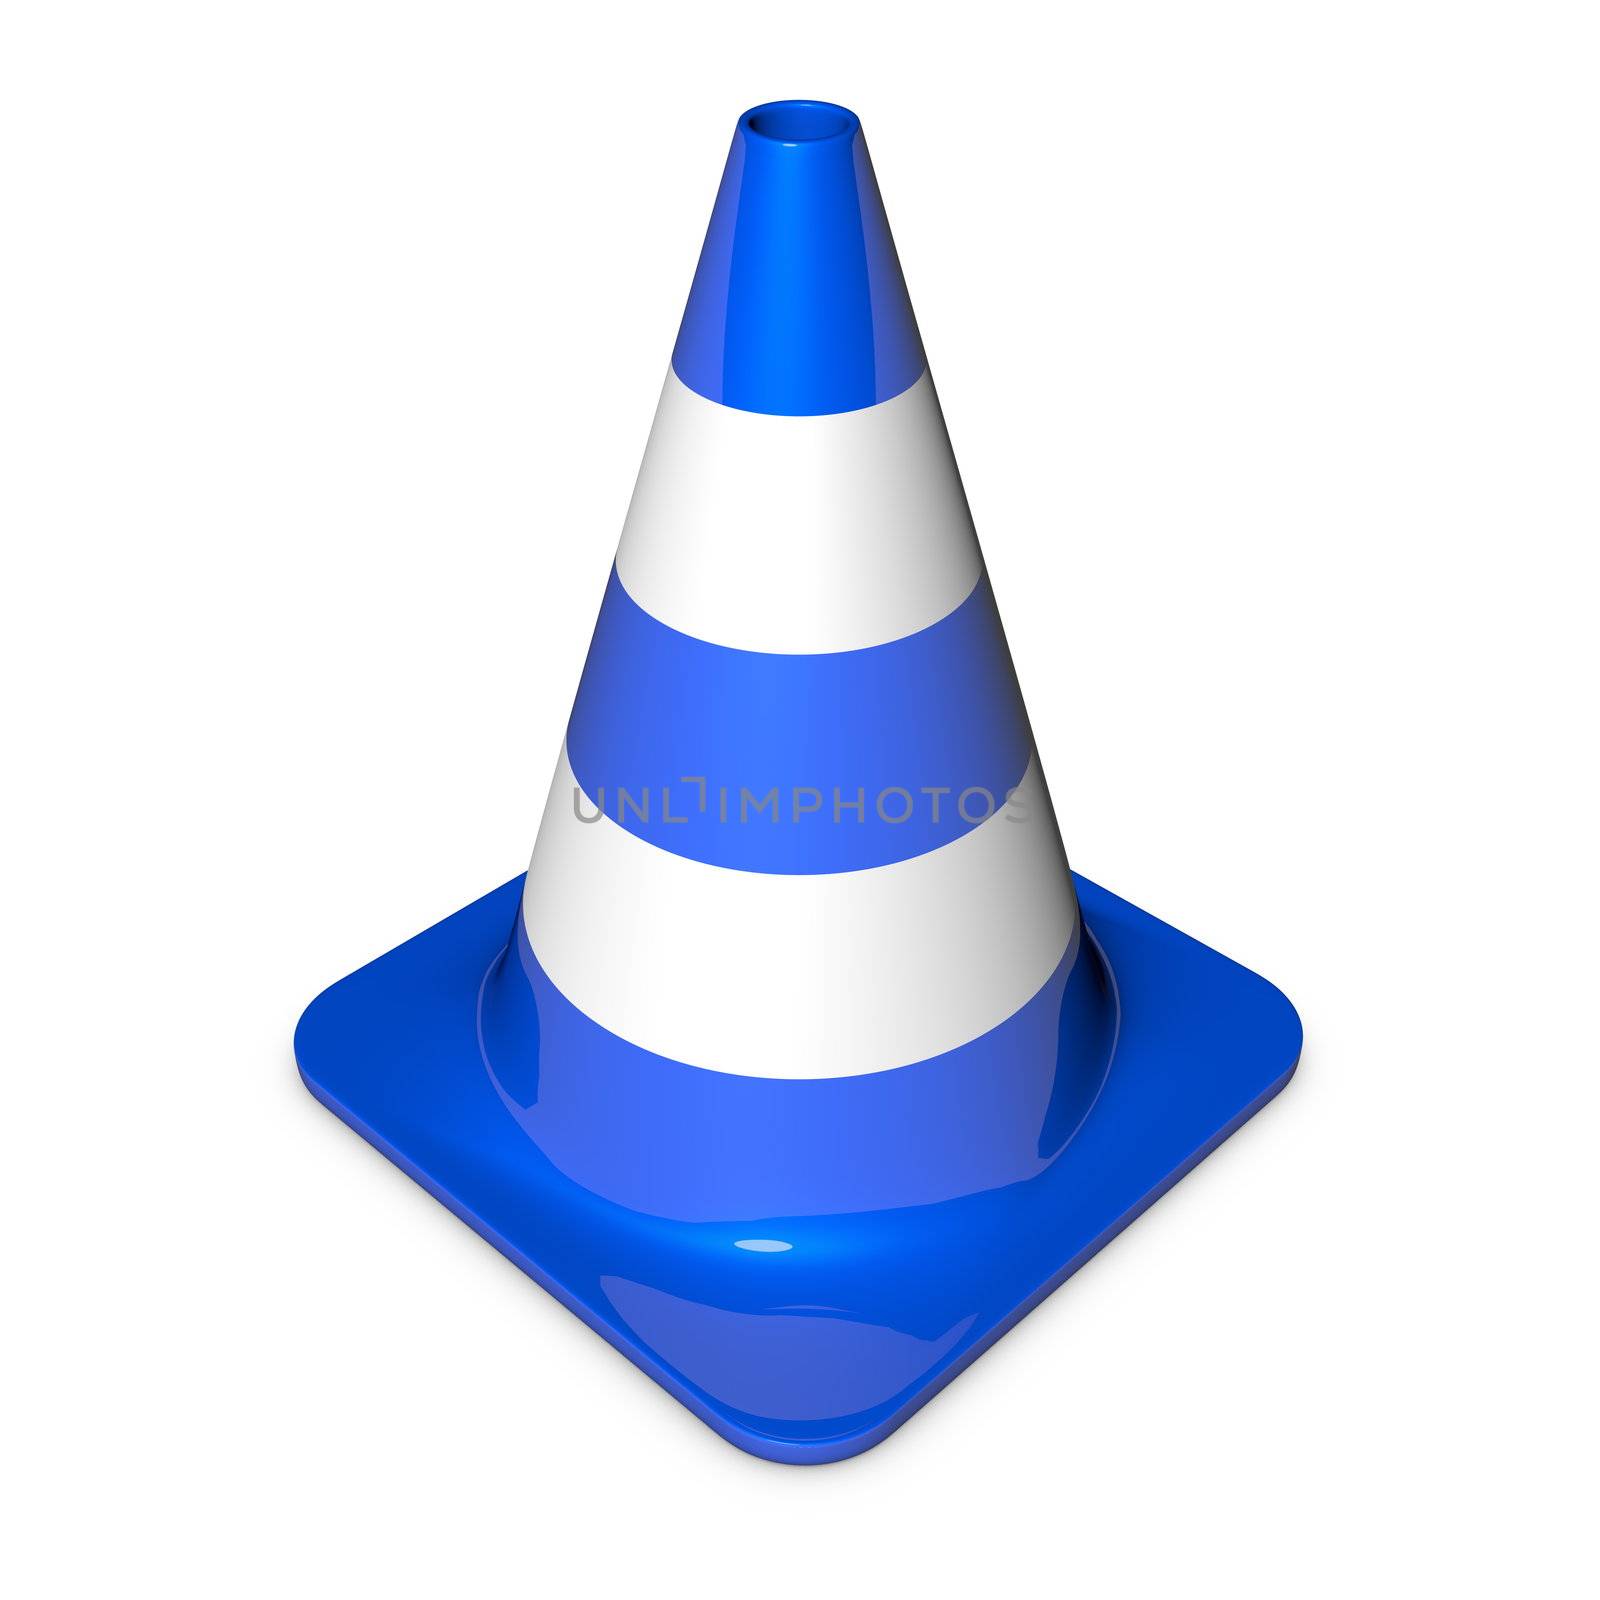 single traffic in 3d with shiny blue and white stripes